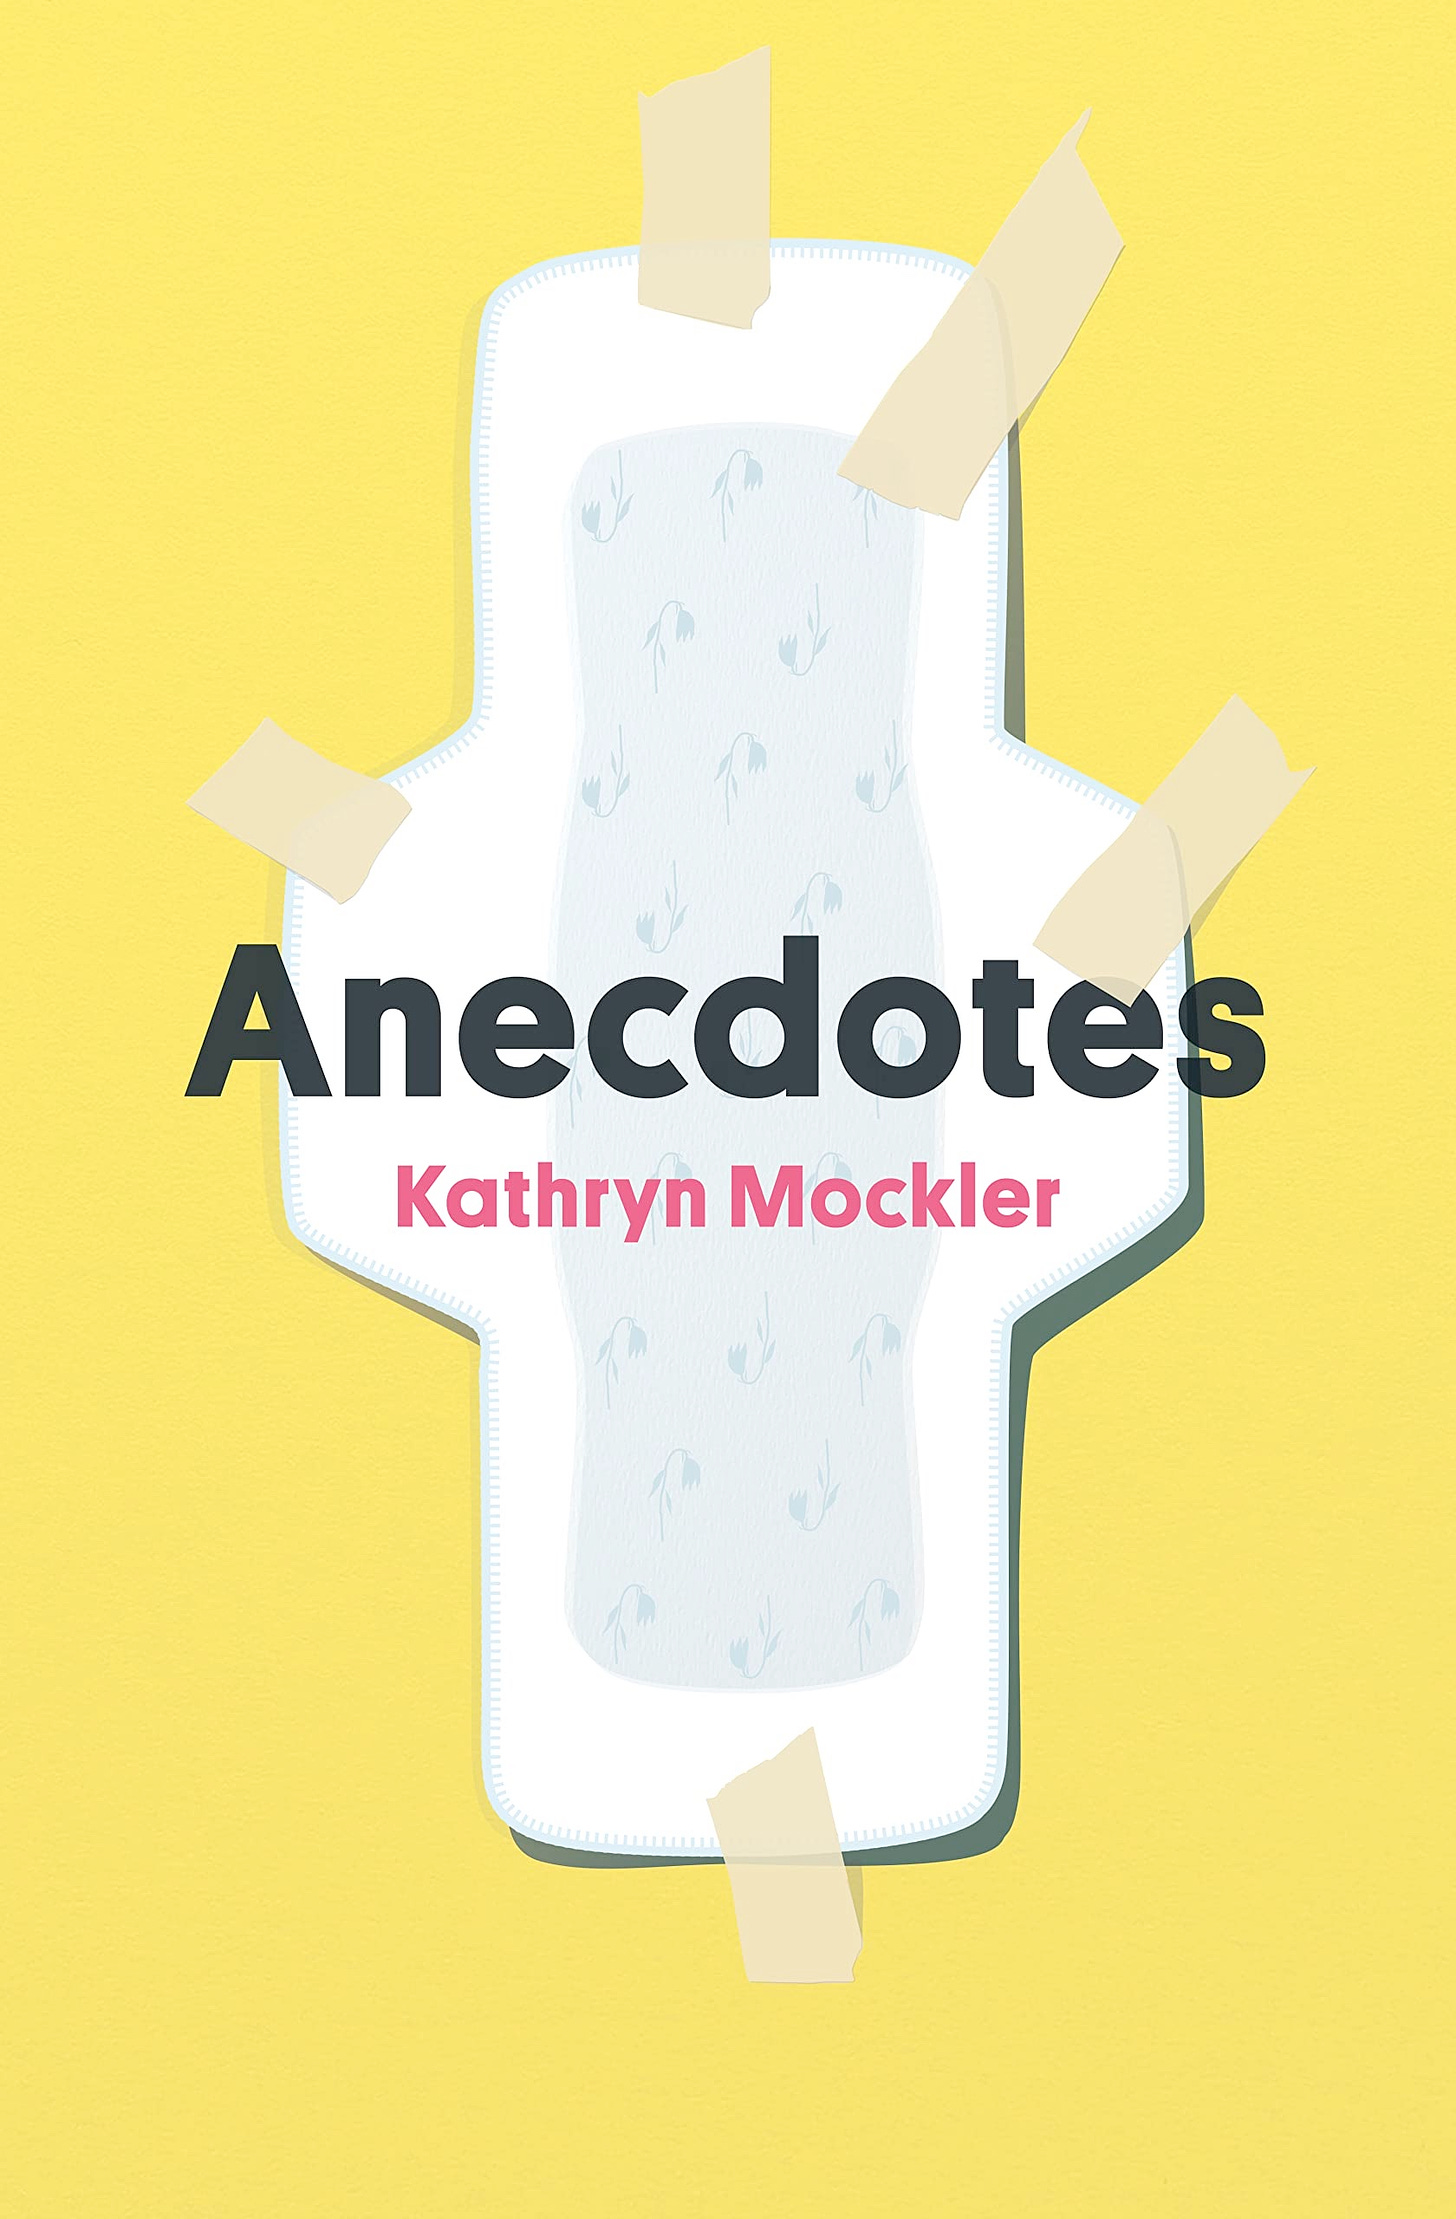 A maxi pad taped to a yellow wall over which the text Anecdotes by Kathryn Mockler